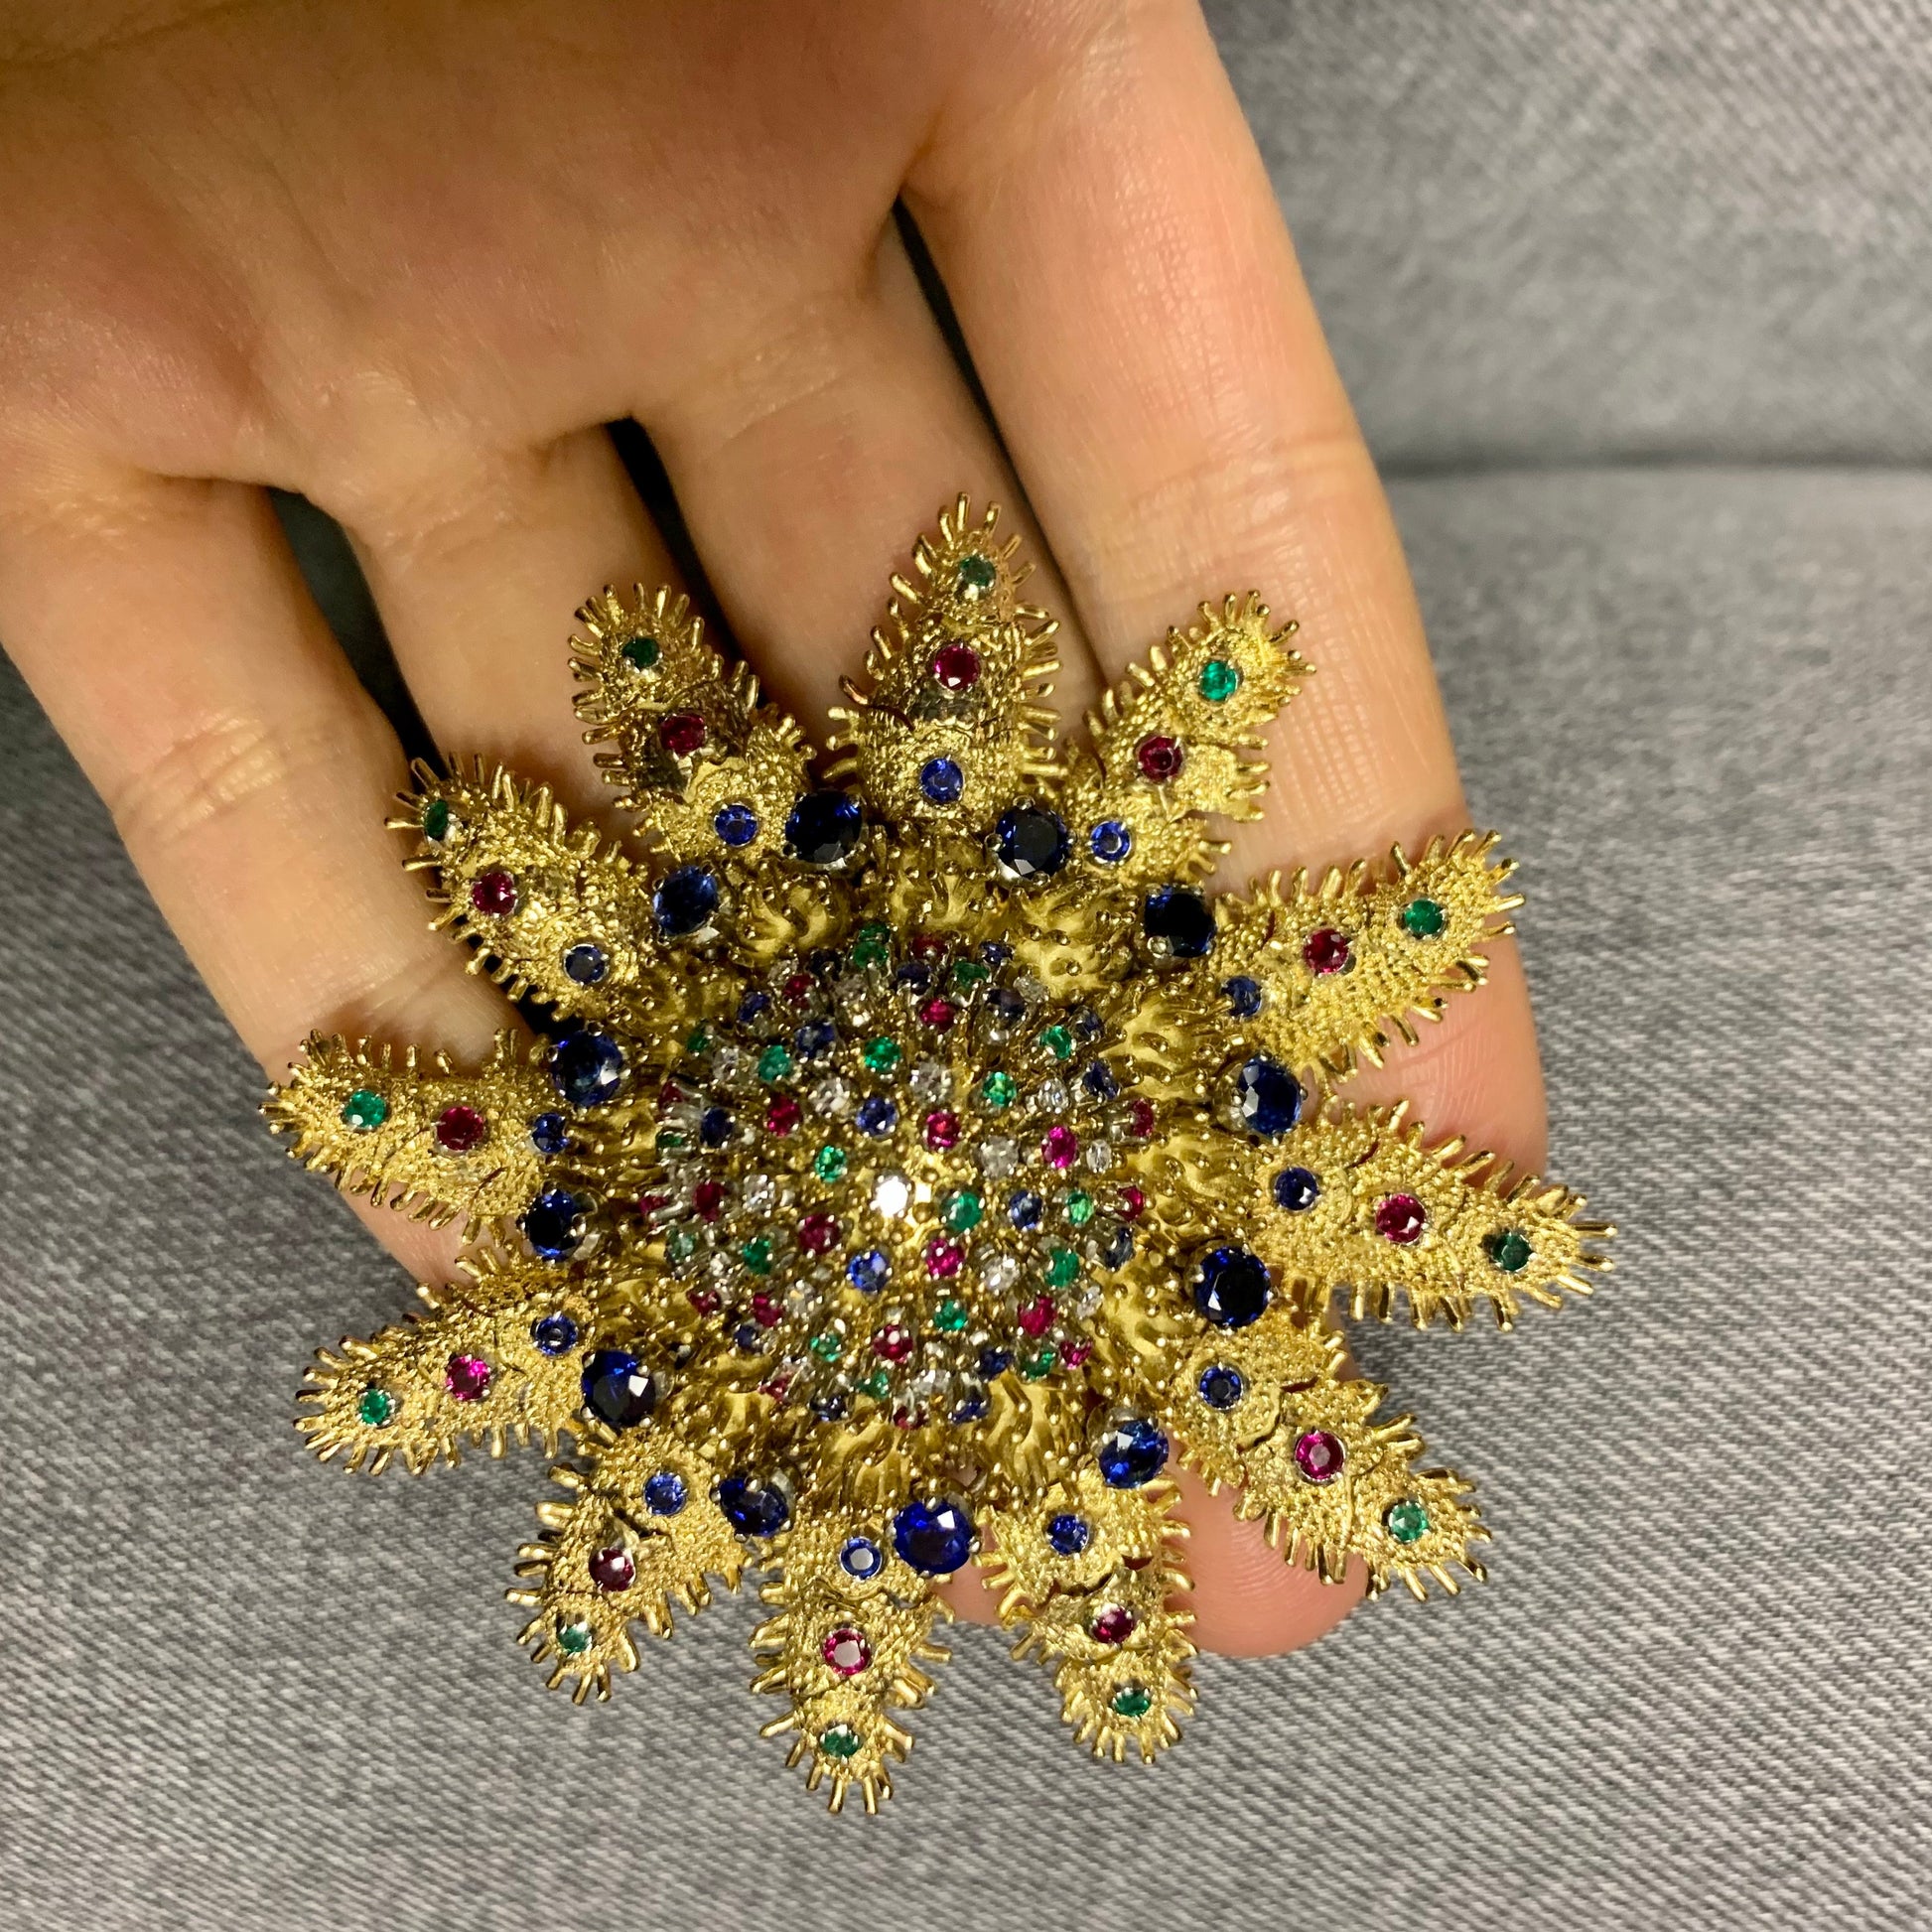 1960s 18KT Yellow Gold Diamond, Emerald, Ruby & Sapphire Articulated Starfish Brooch in hand